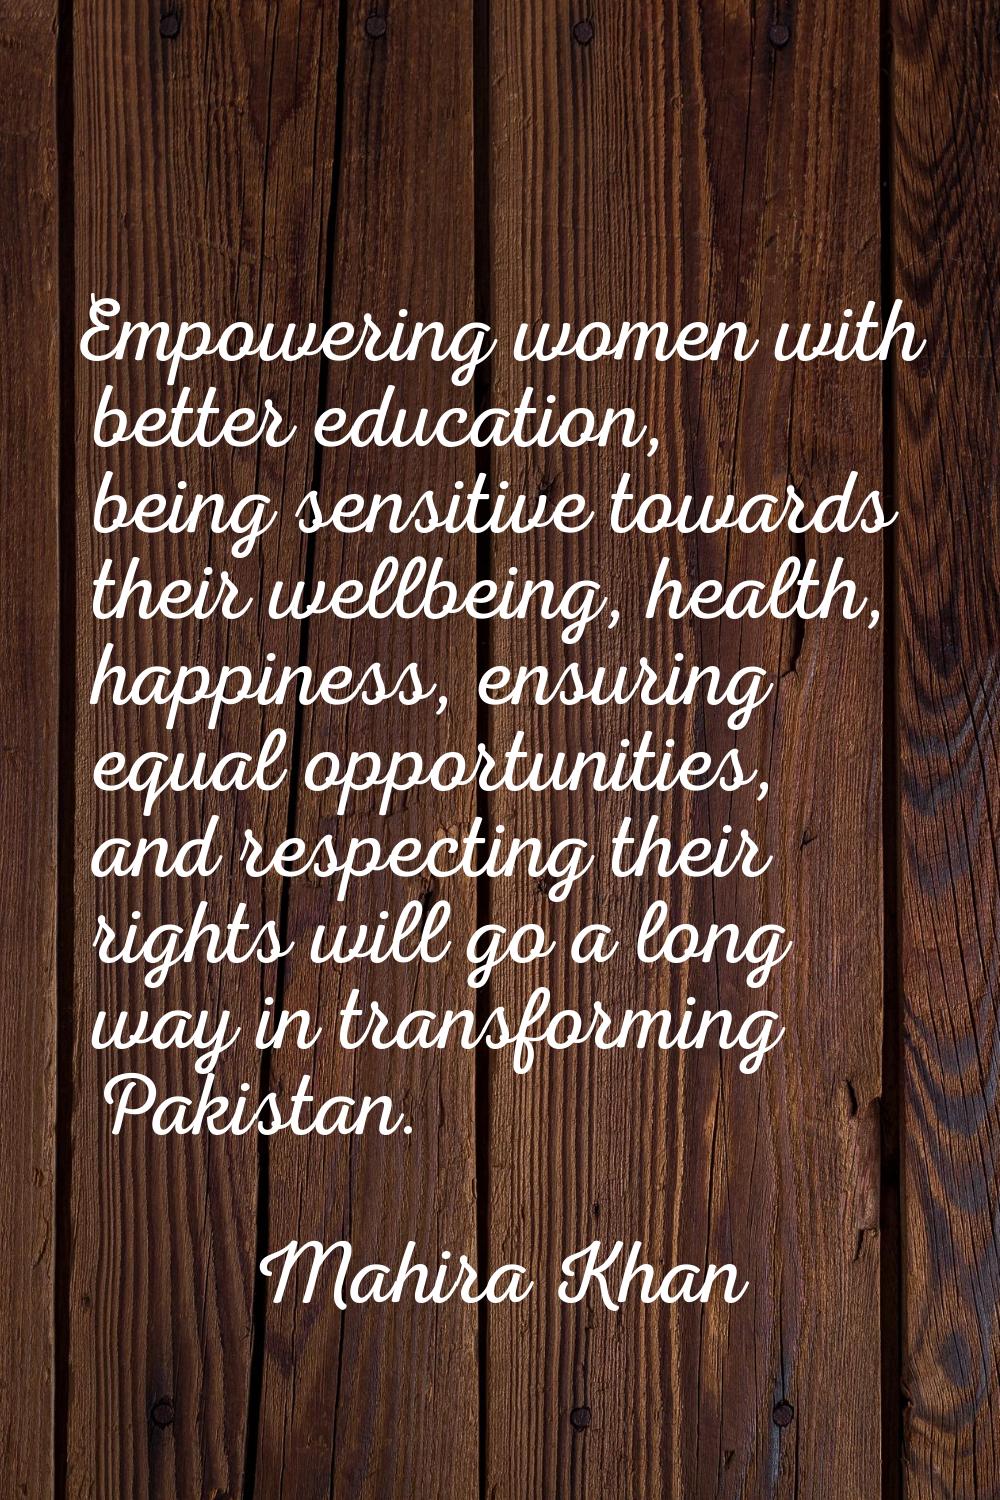 Empowering women with better education, being sensitive towards their wellbeing, health, happiness,